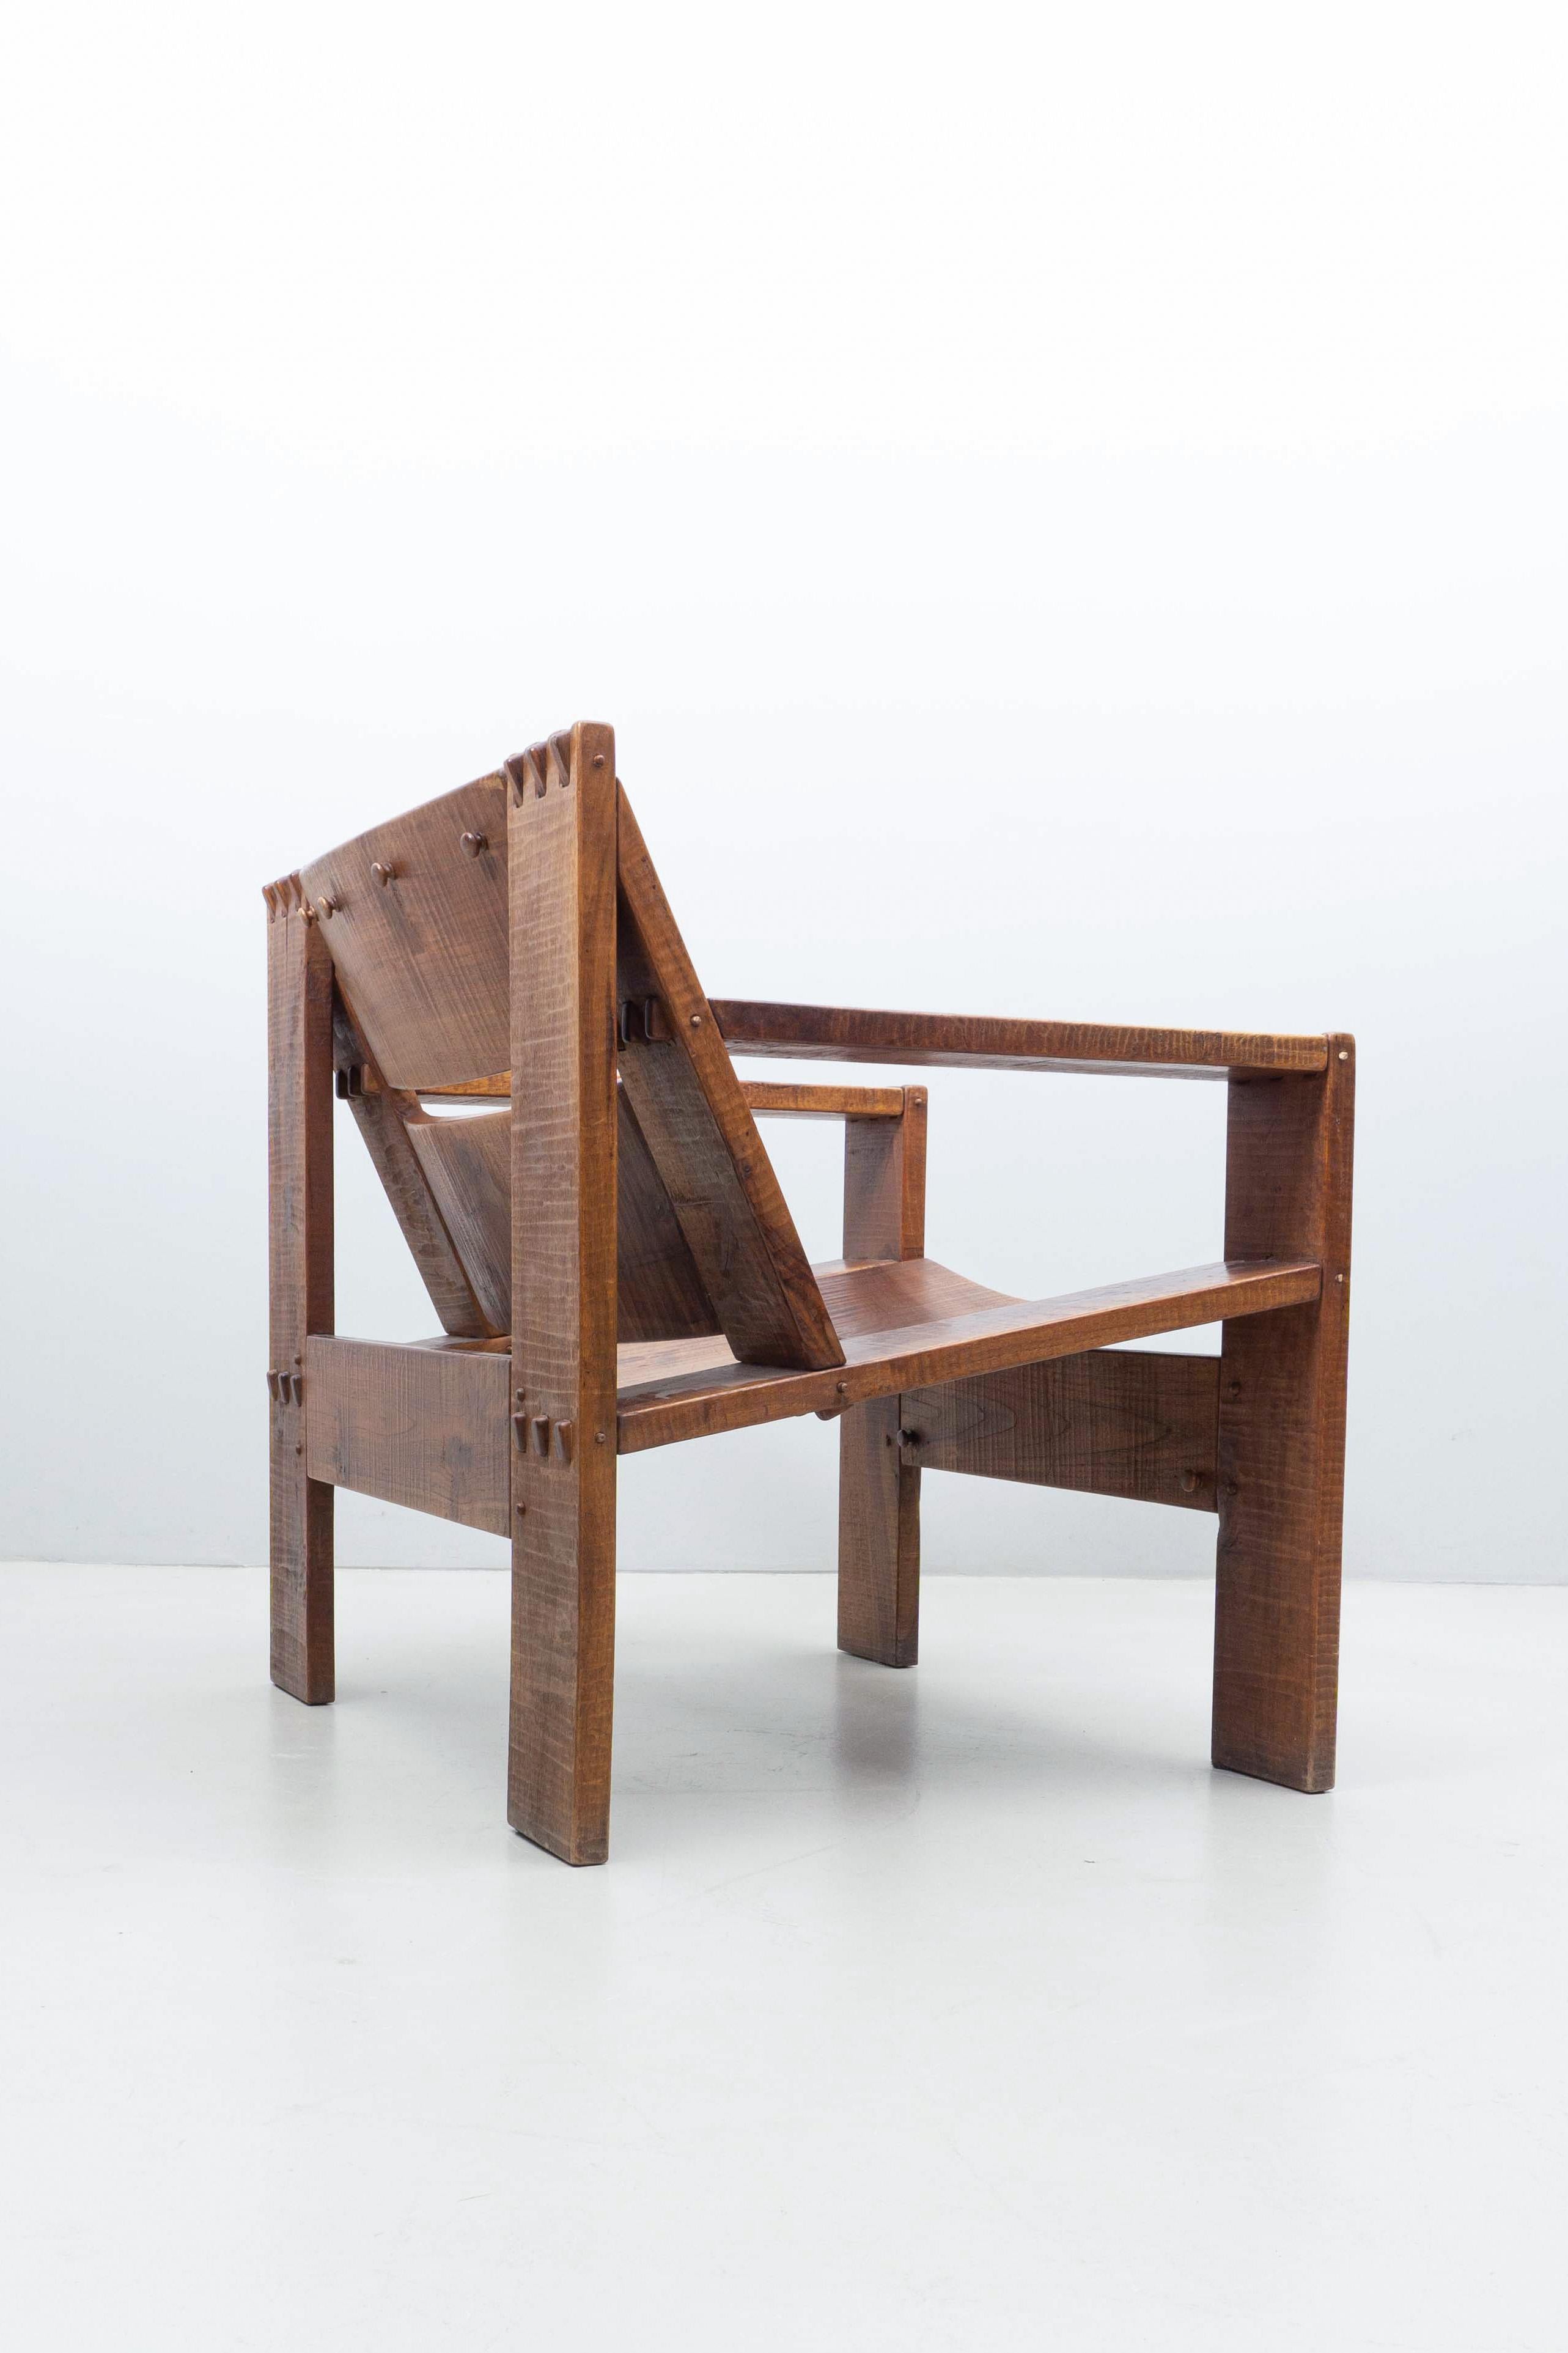 An extraordinary set of chairs by Giuseppe Rivadossi, ca. 1970. Massive wood with a hand-carved surface.

The furniture of the Italian designer Guiseppe Rivadossi has a very unique style and great emphasis on material - especially wood - and